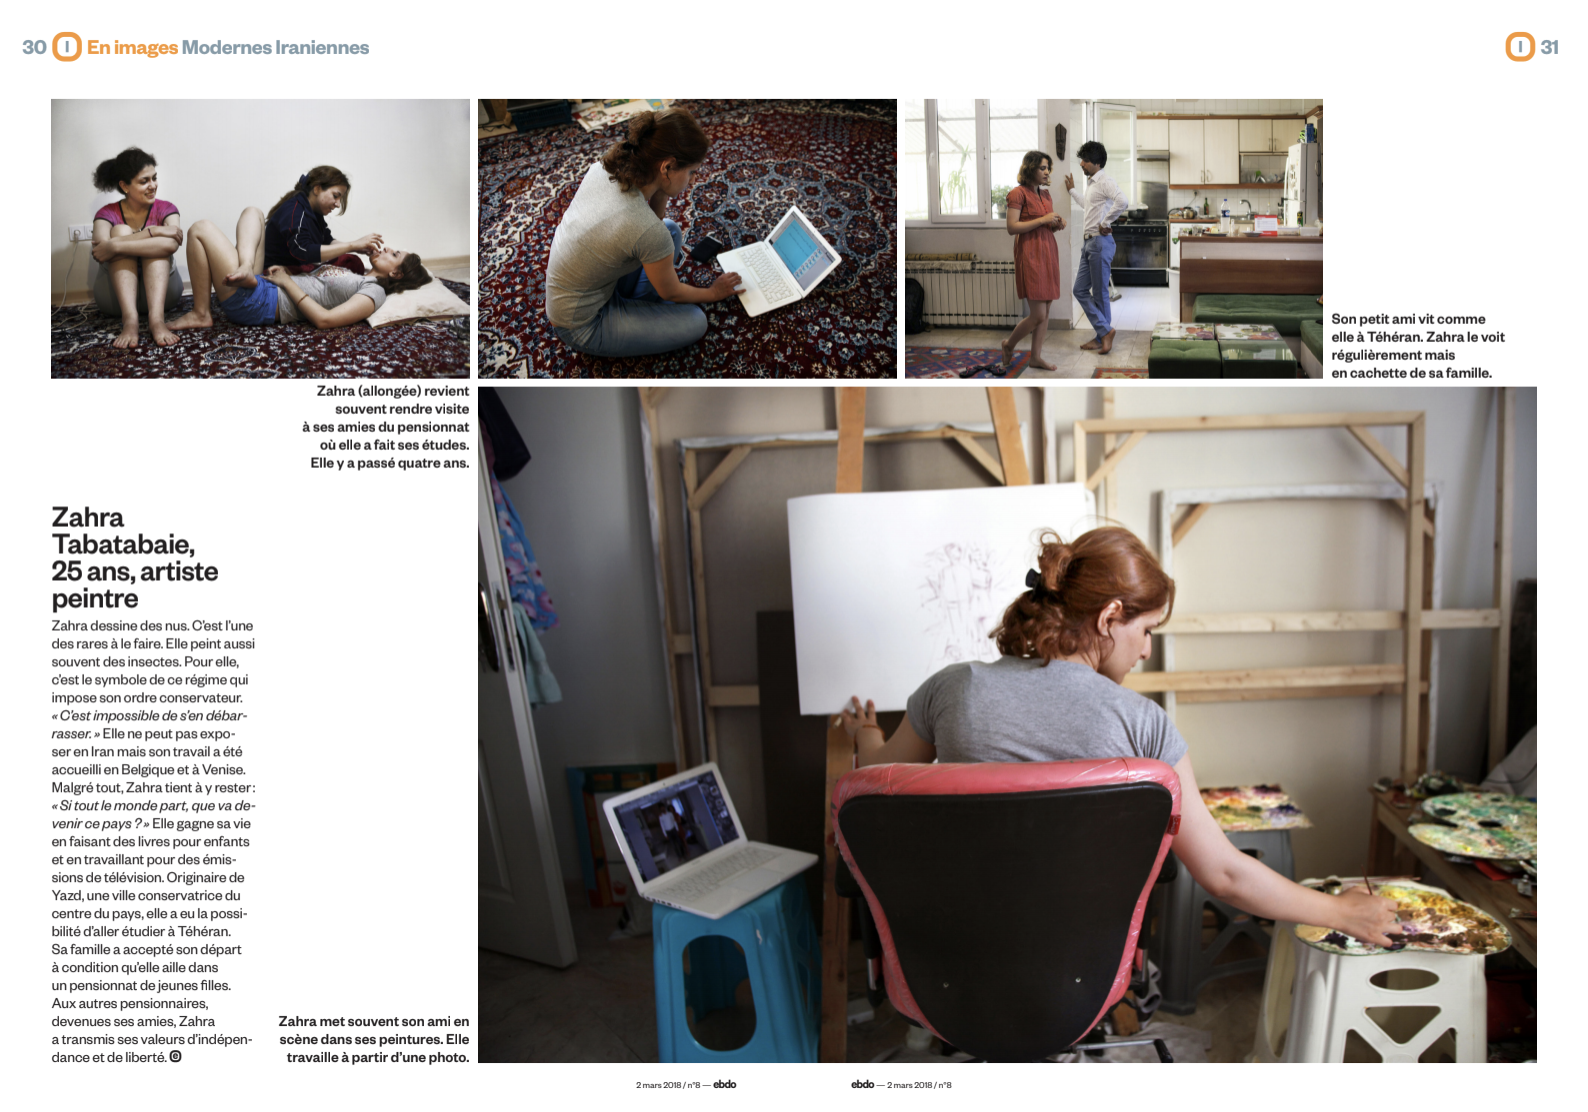 Image from Publications - Ebdo - 8 pages